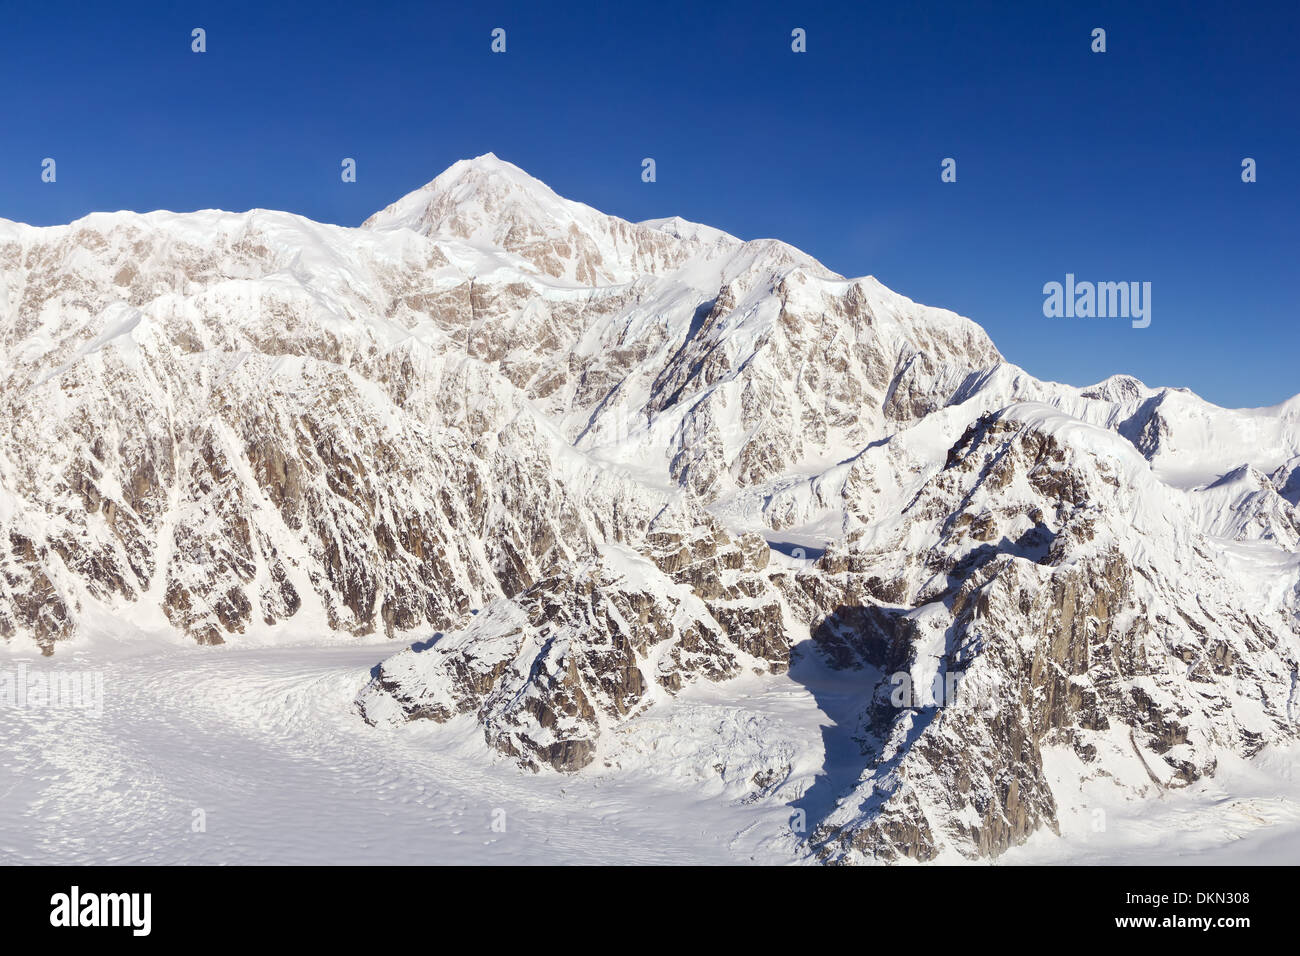 View from the south side of the top of Mount McKinley in the Denali National Park and Preserve, Alaska Stock Photo